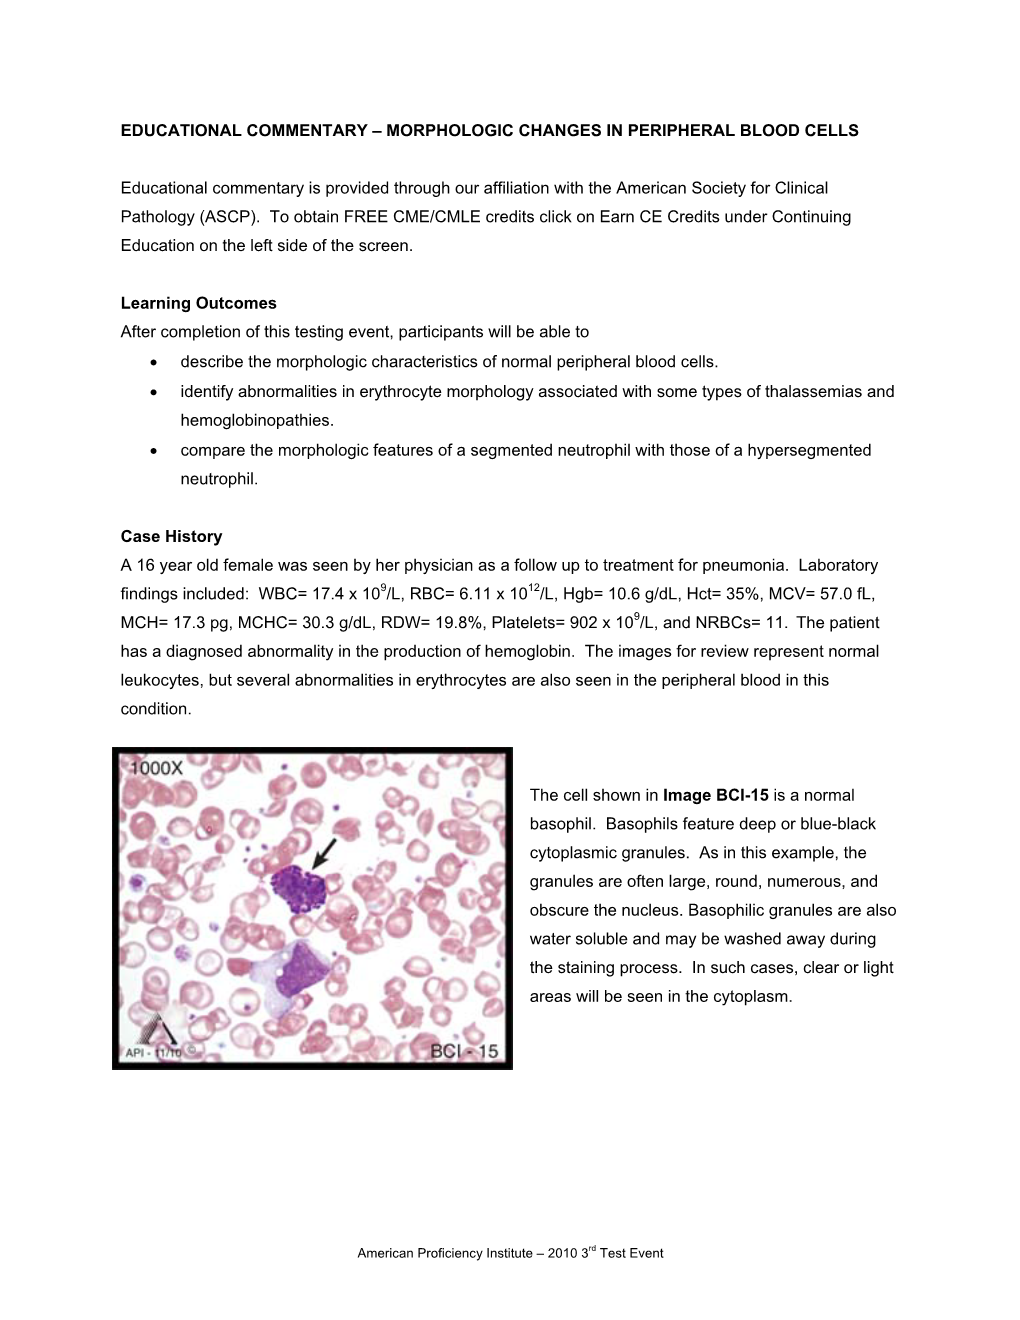 Educational Commentary – Morphologic Changes in Peripheral Blood Cells